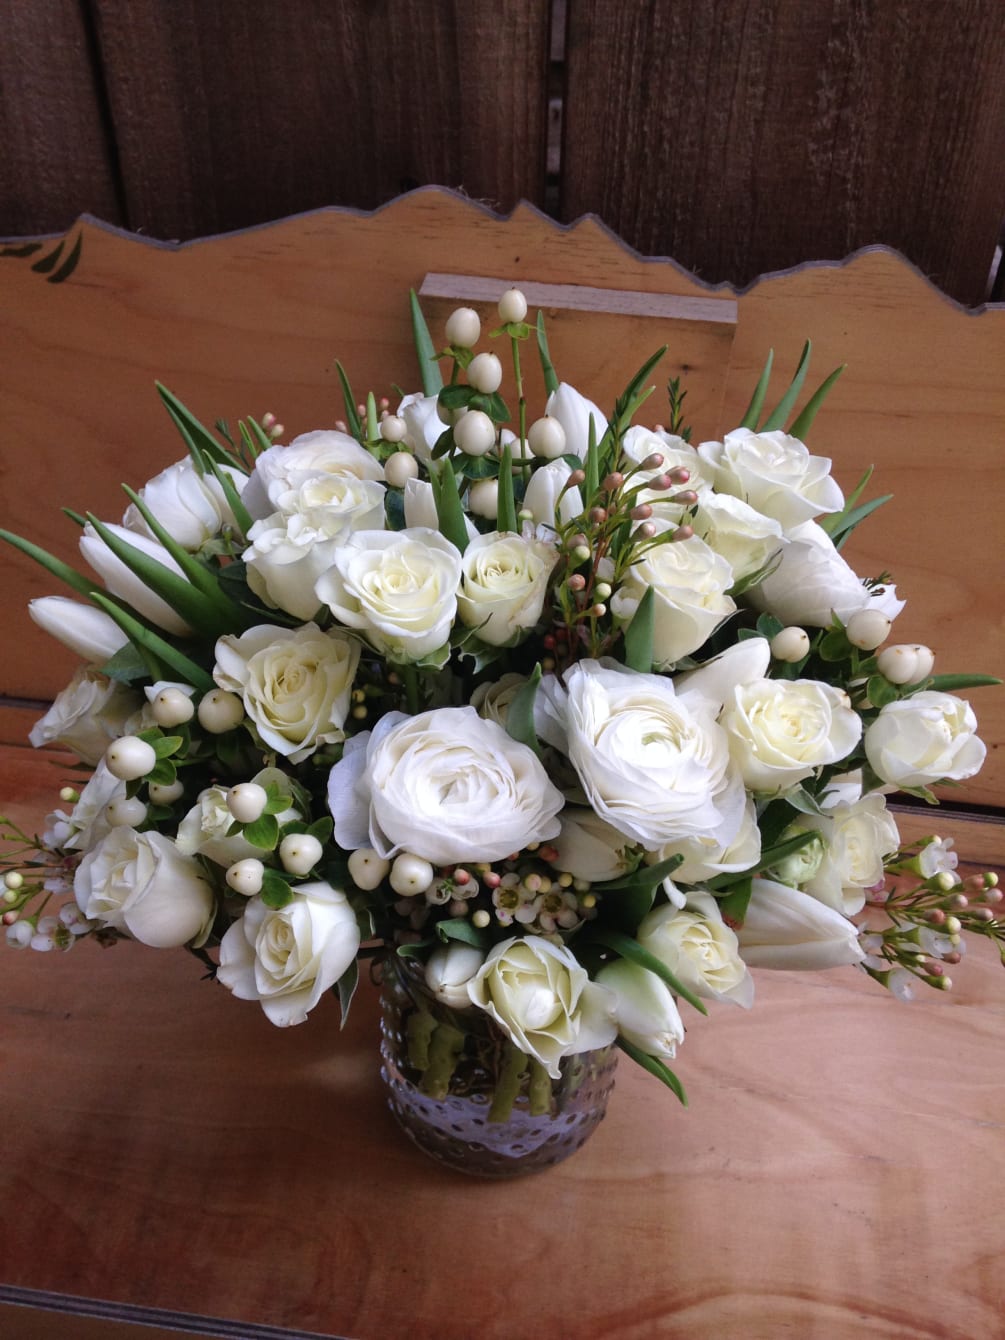 This unique arrangement is an elegant addition to your winter season. Featuring